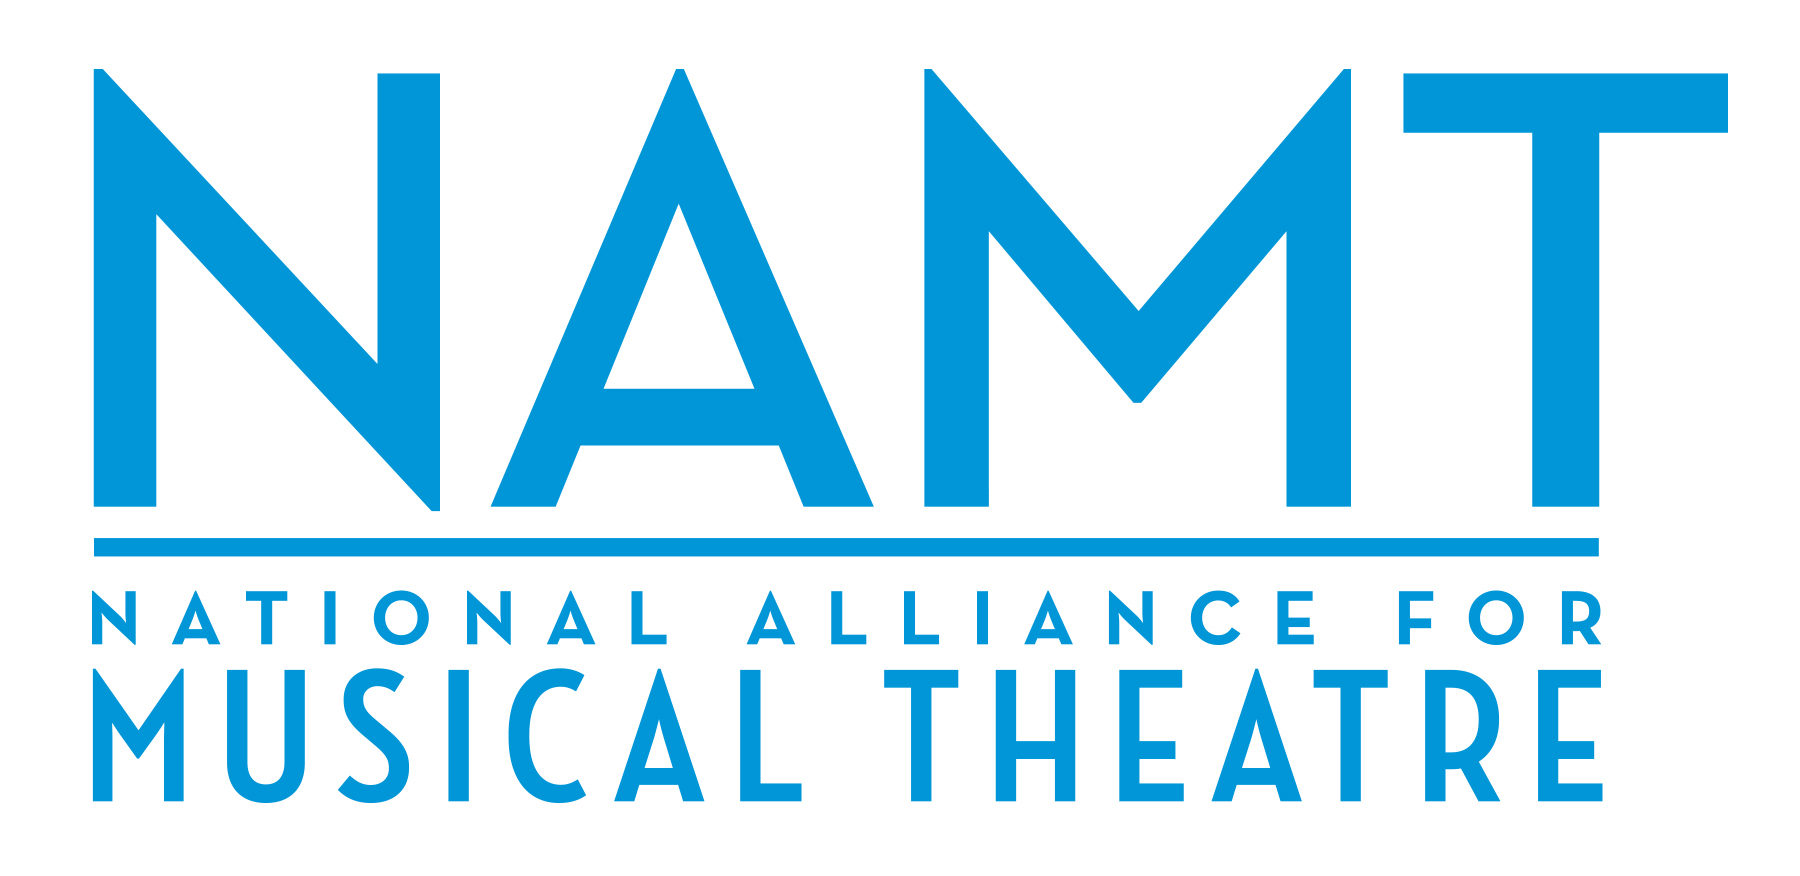 National Alliance for Musical Theatre logo